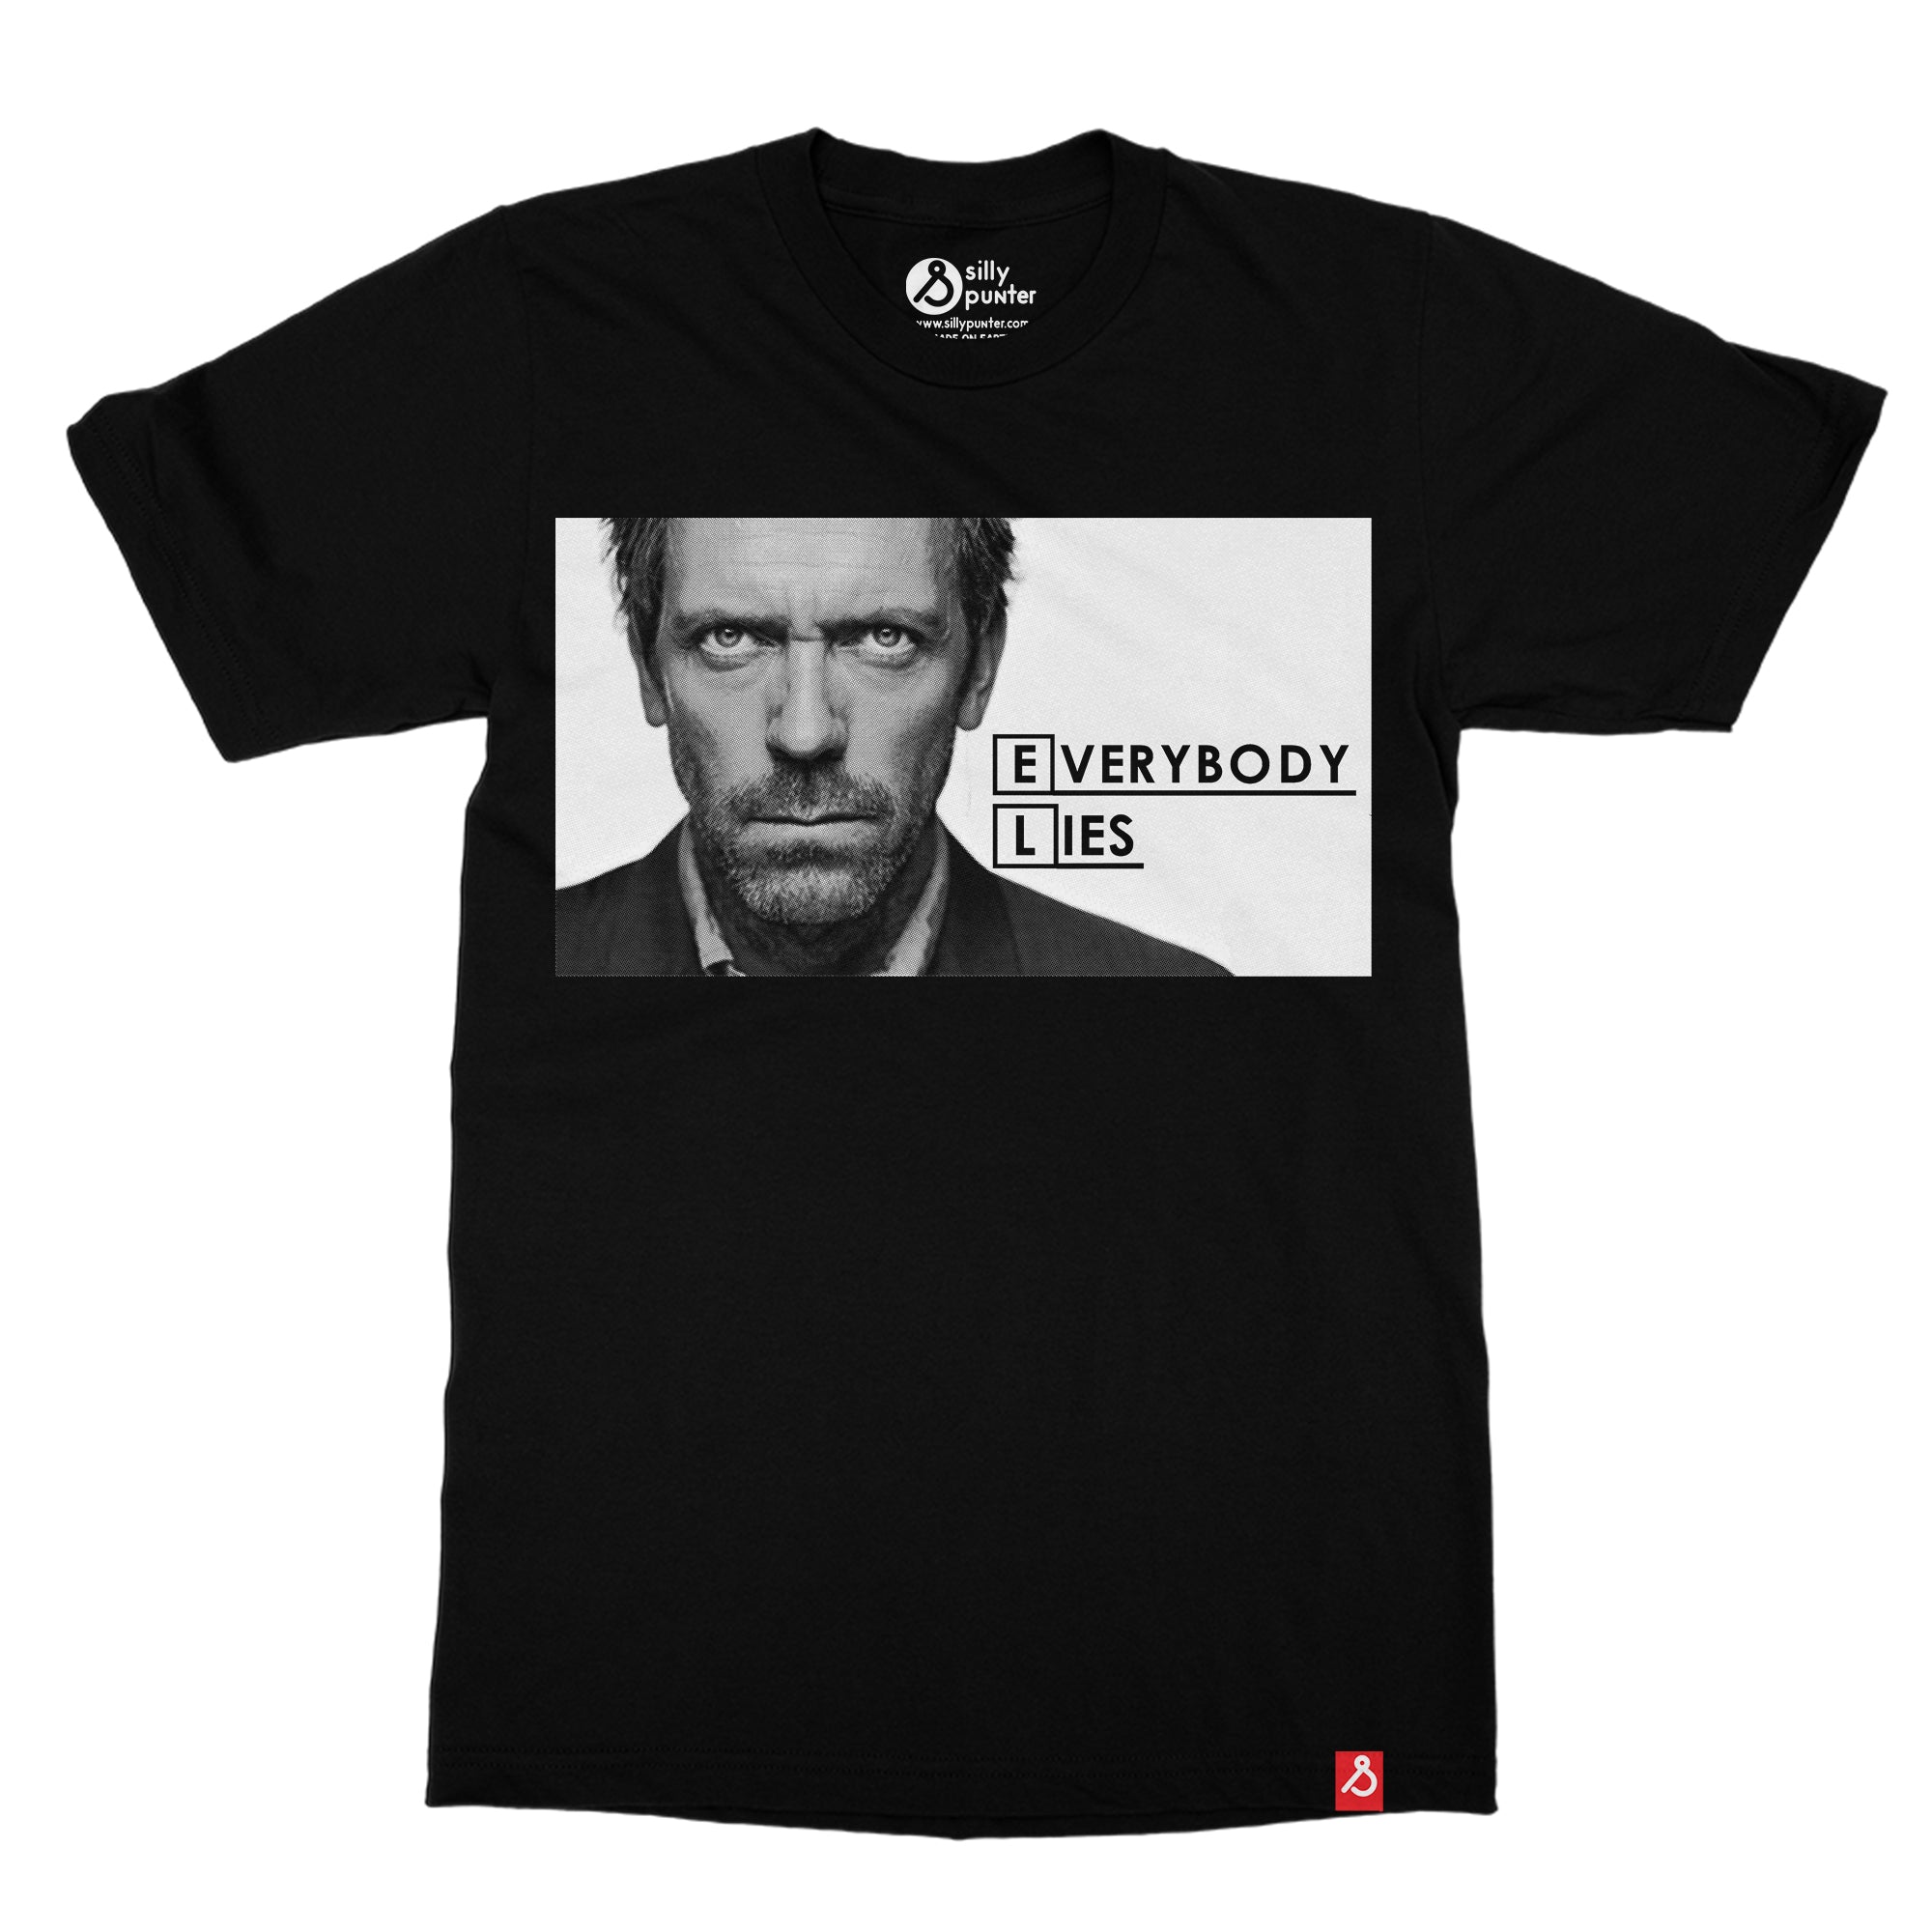 house md merchandise india